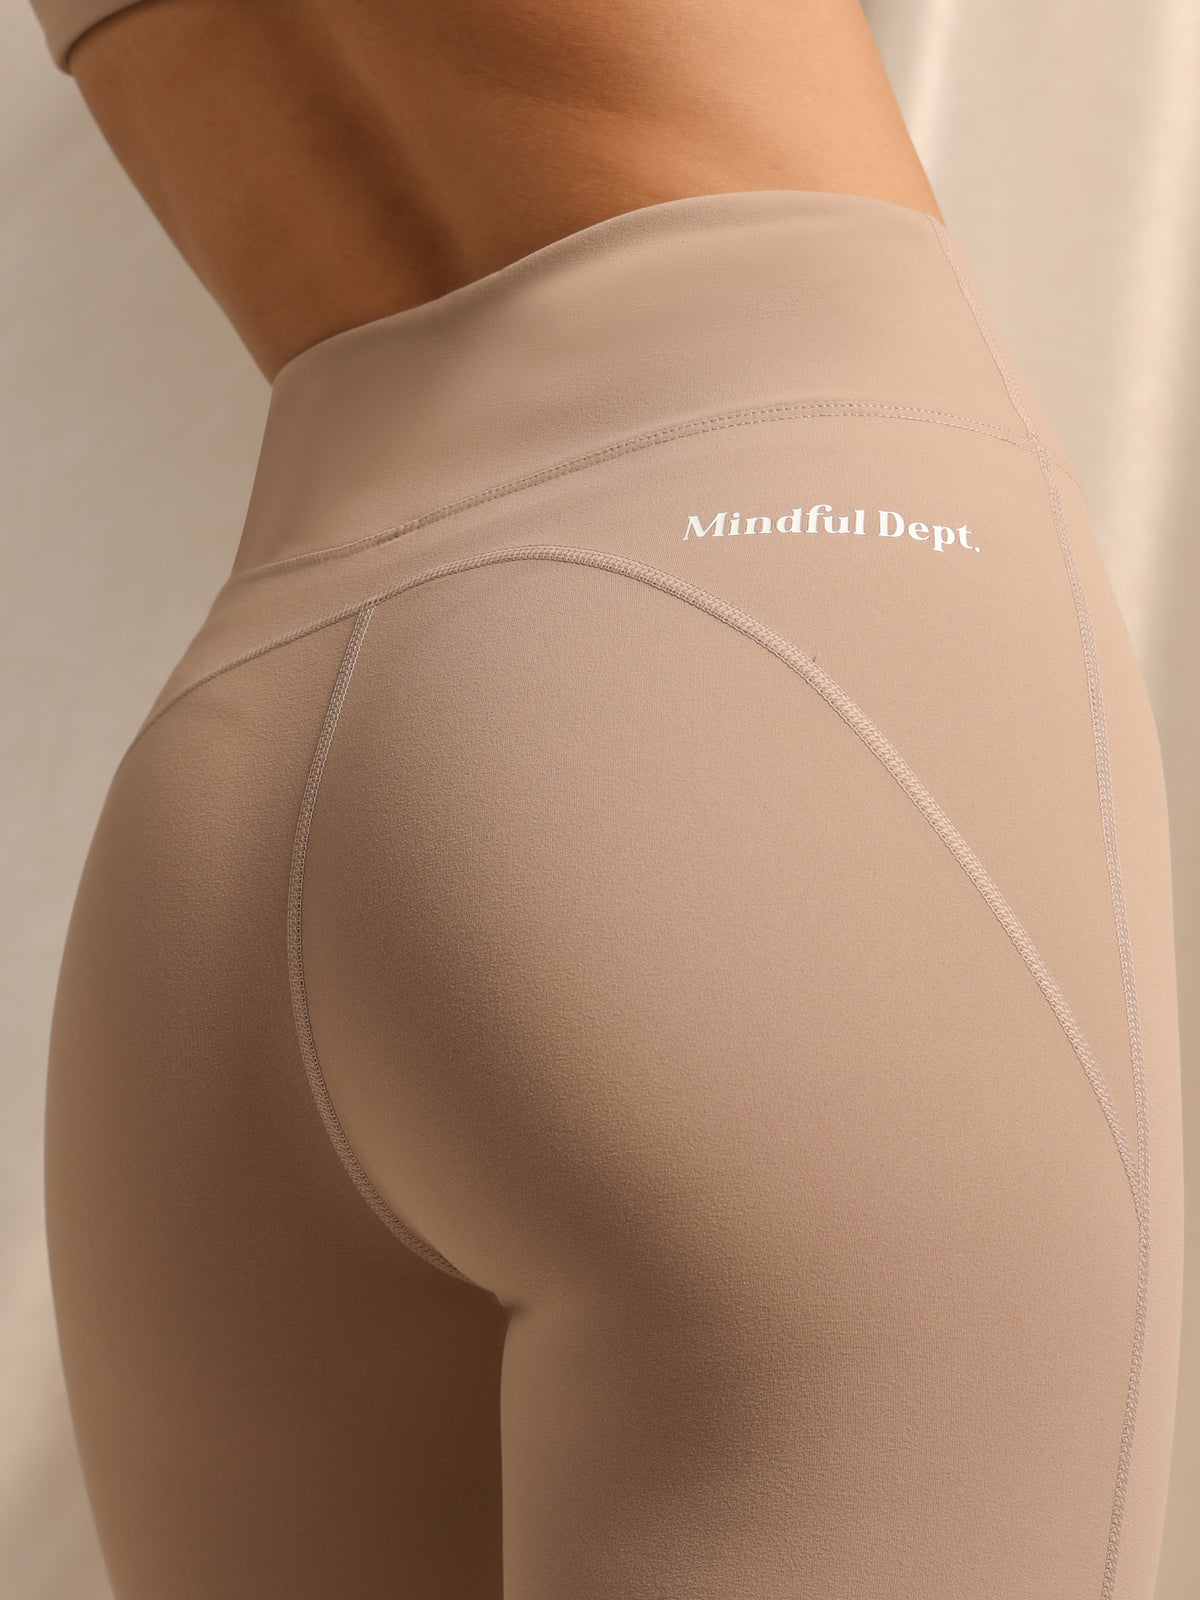 Positive Legging in Taupe